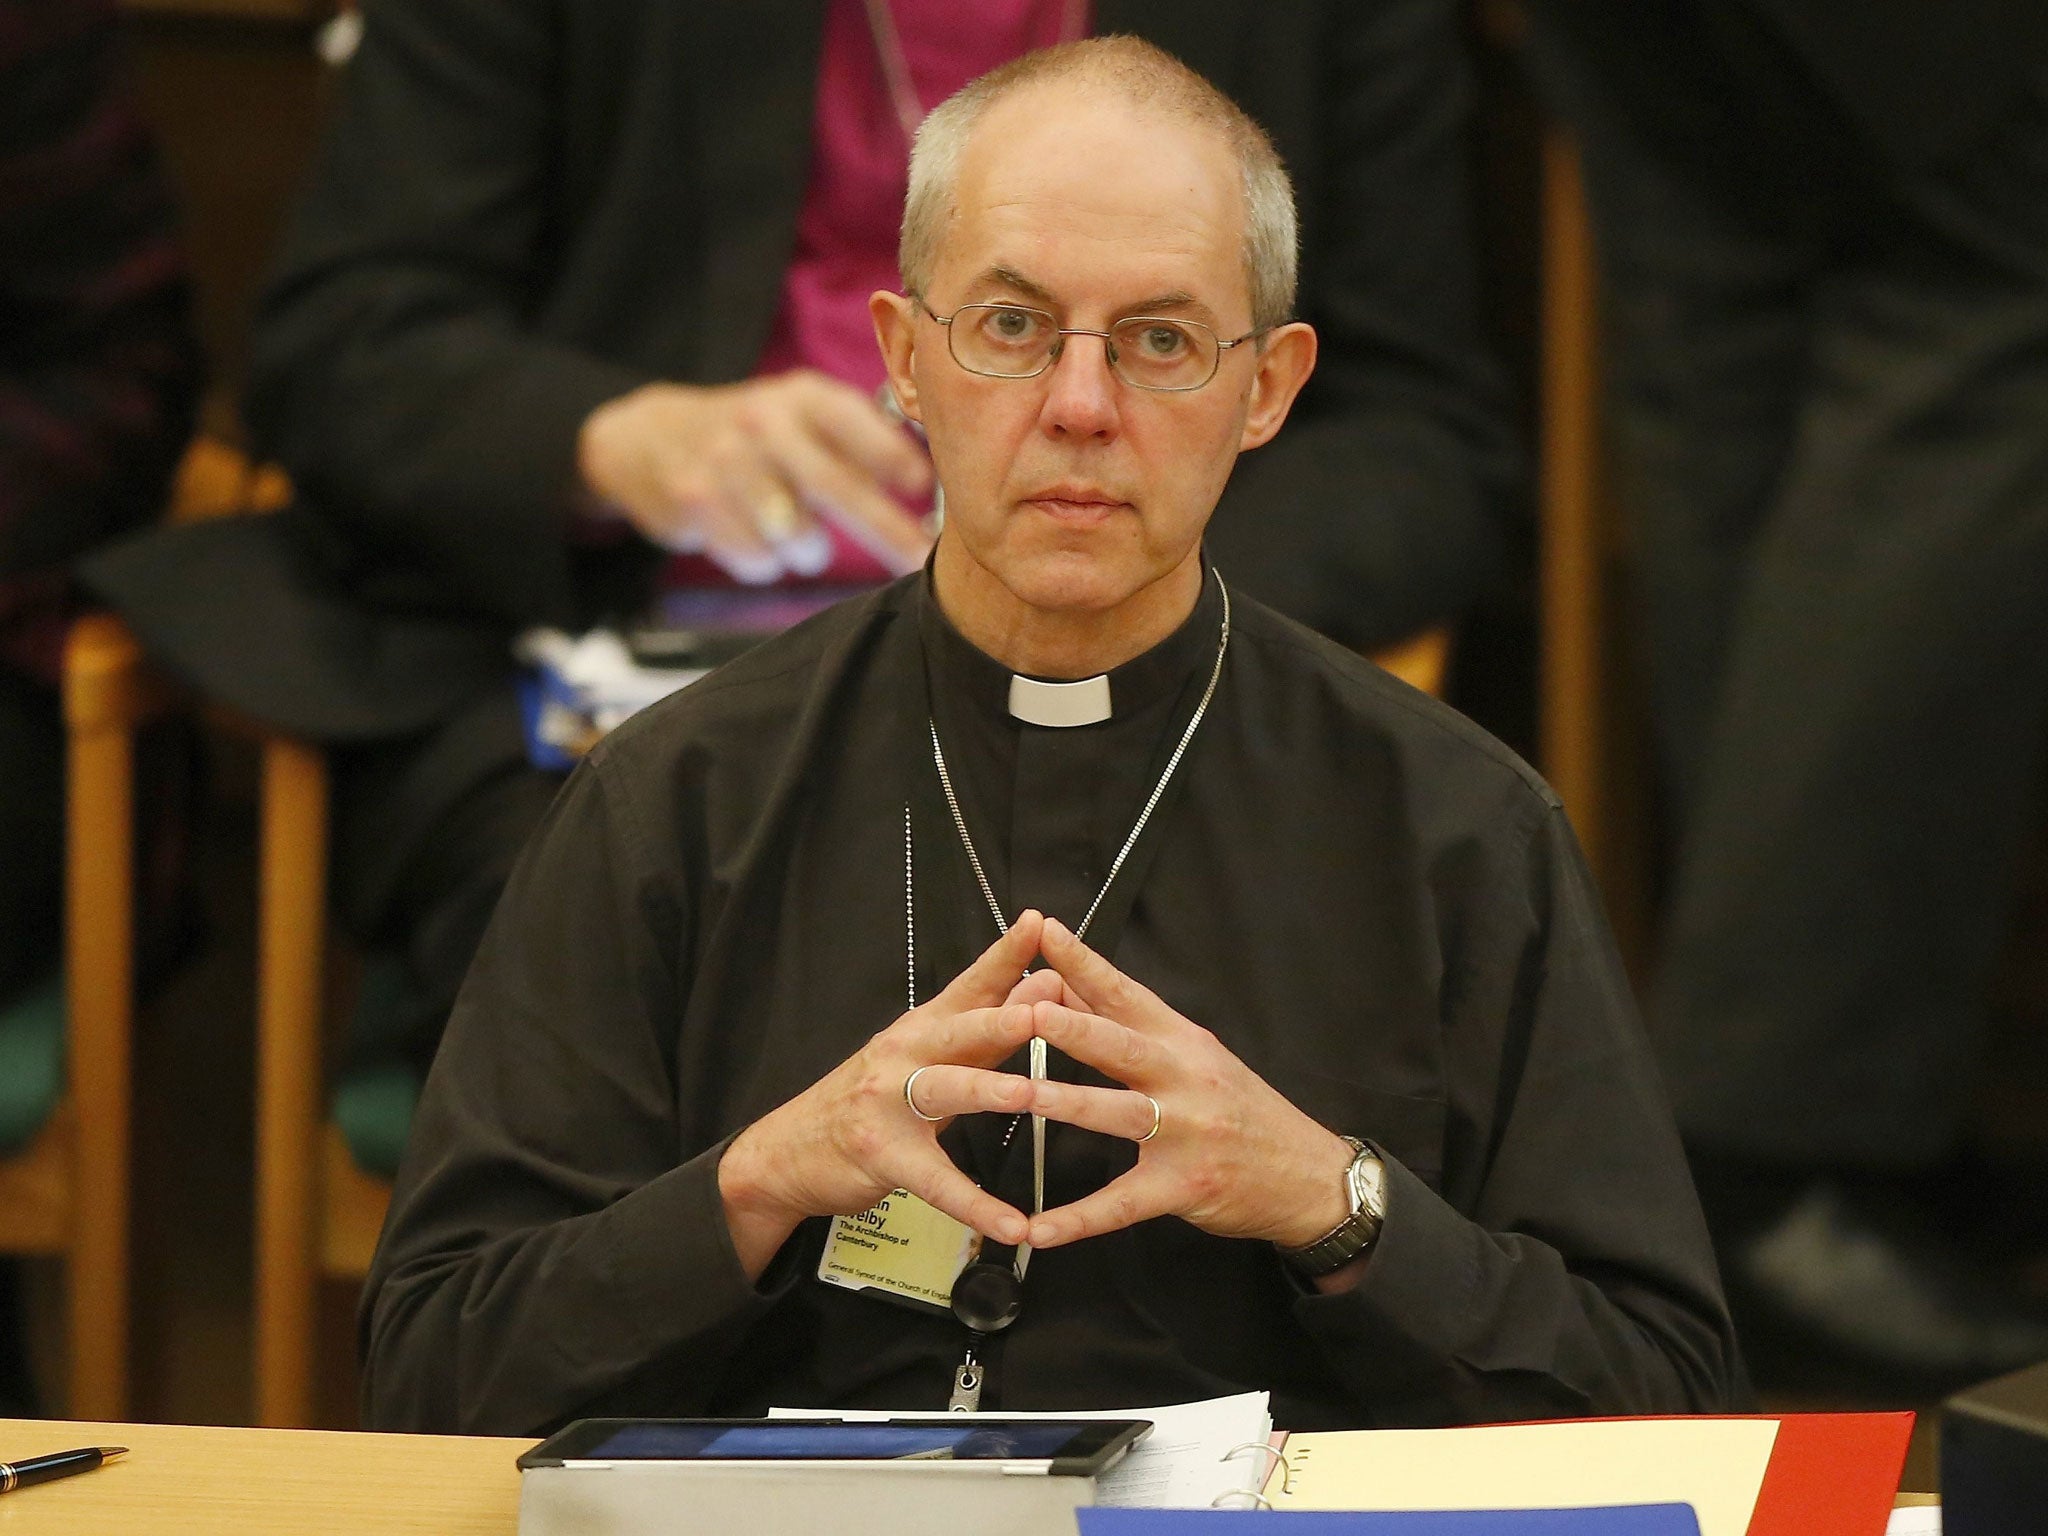 Archbishop Welby had previously spoken out against payday lenders such as Wonga